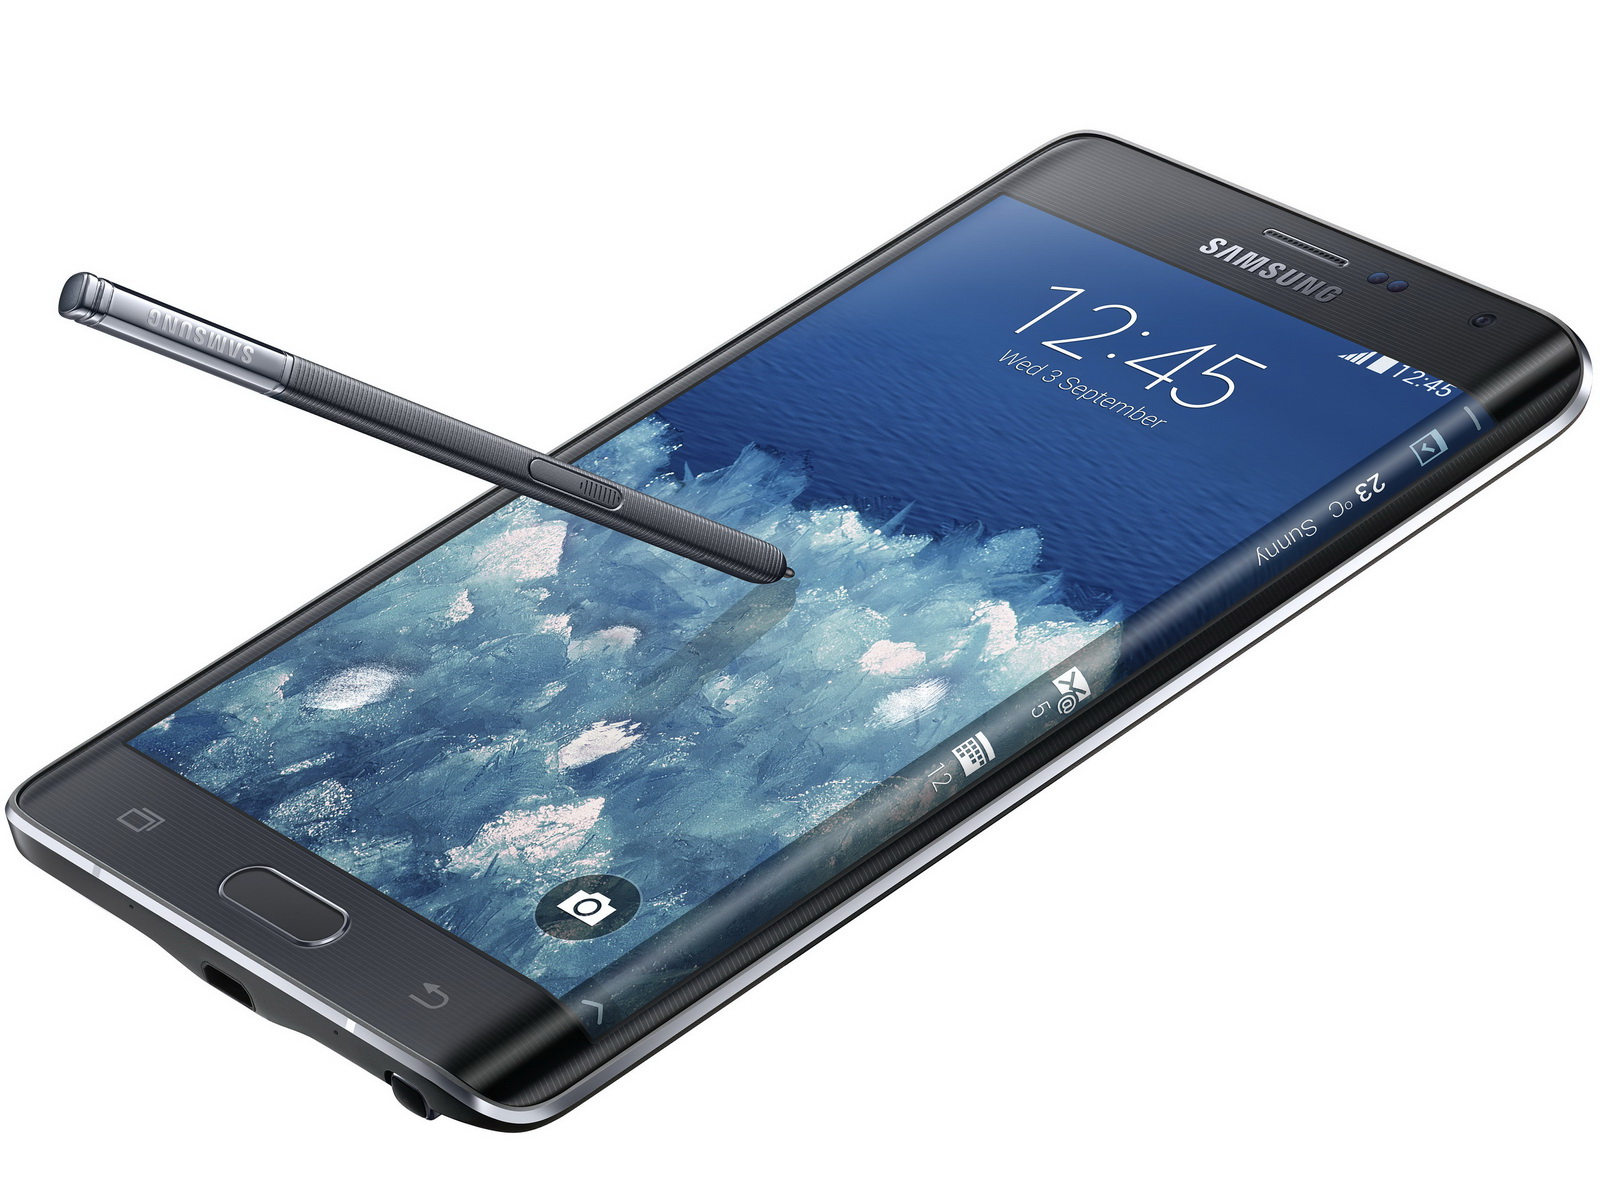 Samsung Galaxy Sport Galaxy Note Edge on get Android Marshmallow - NotebookCheck.net News